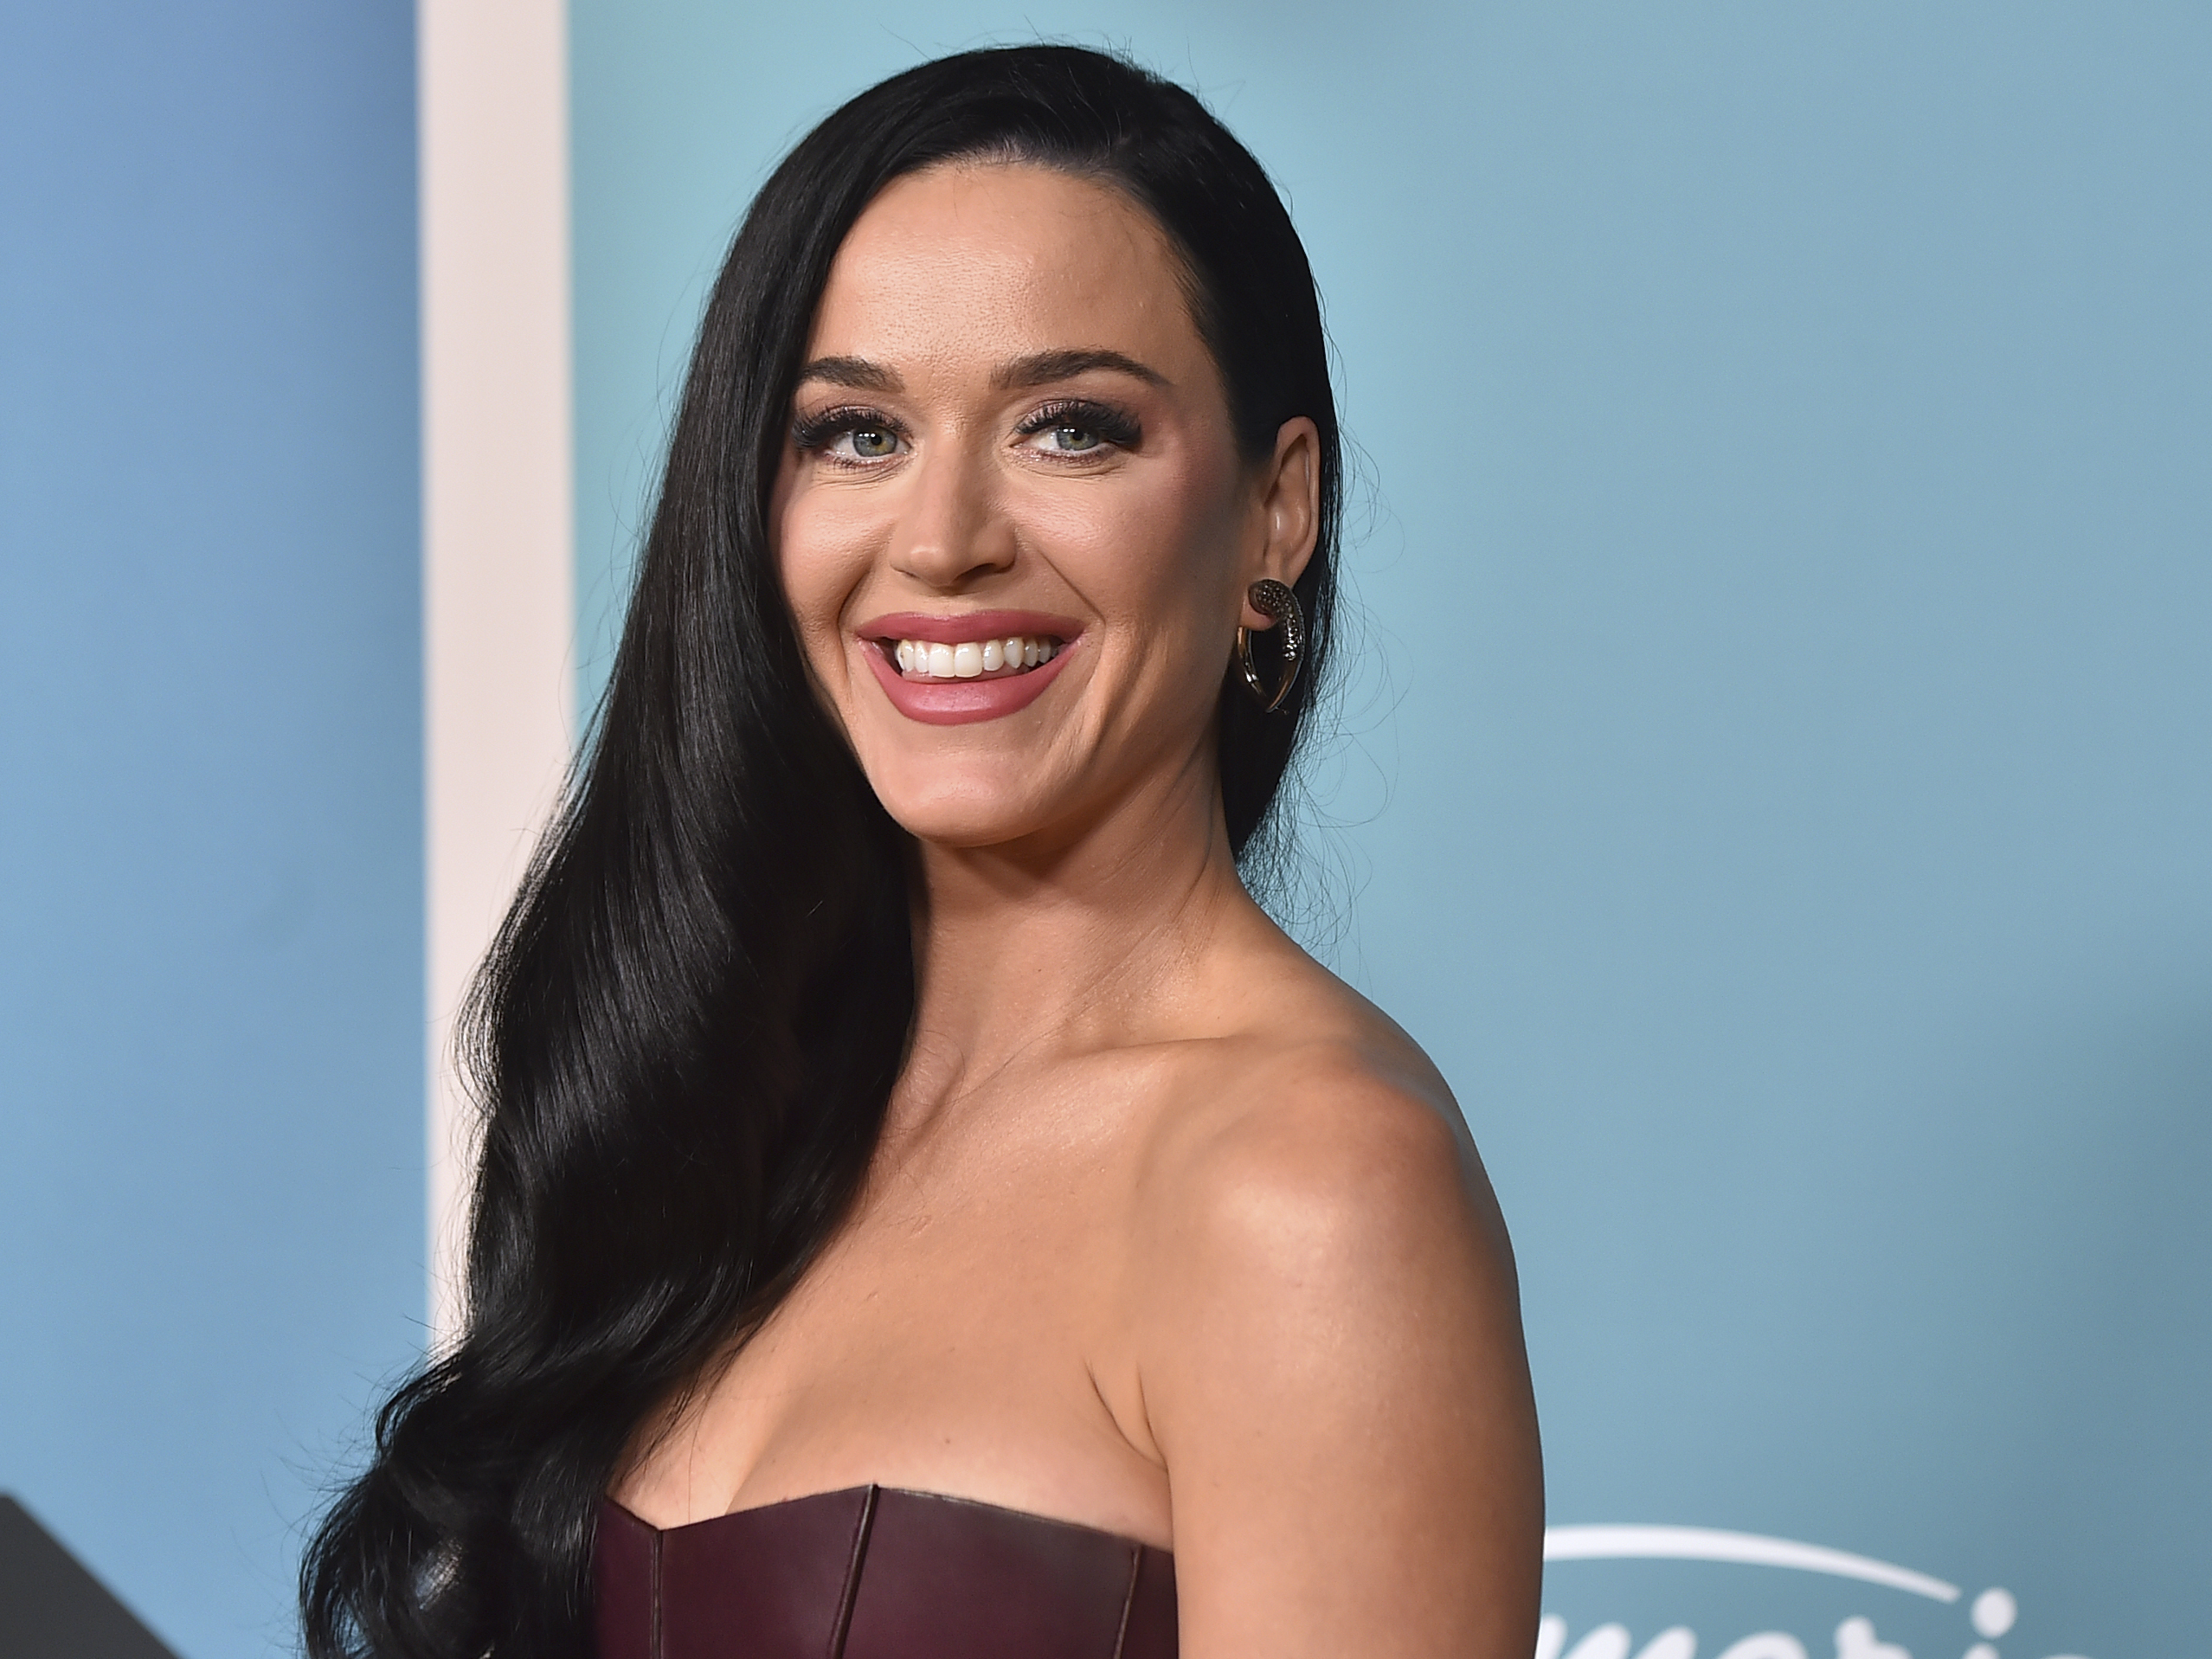 Katy Perry’s own mom fell for her Met Gala AI photo. Do you know what to look for?